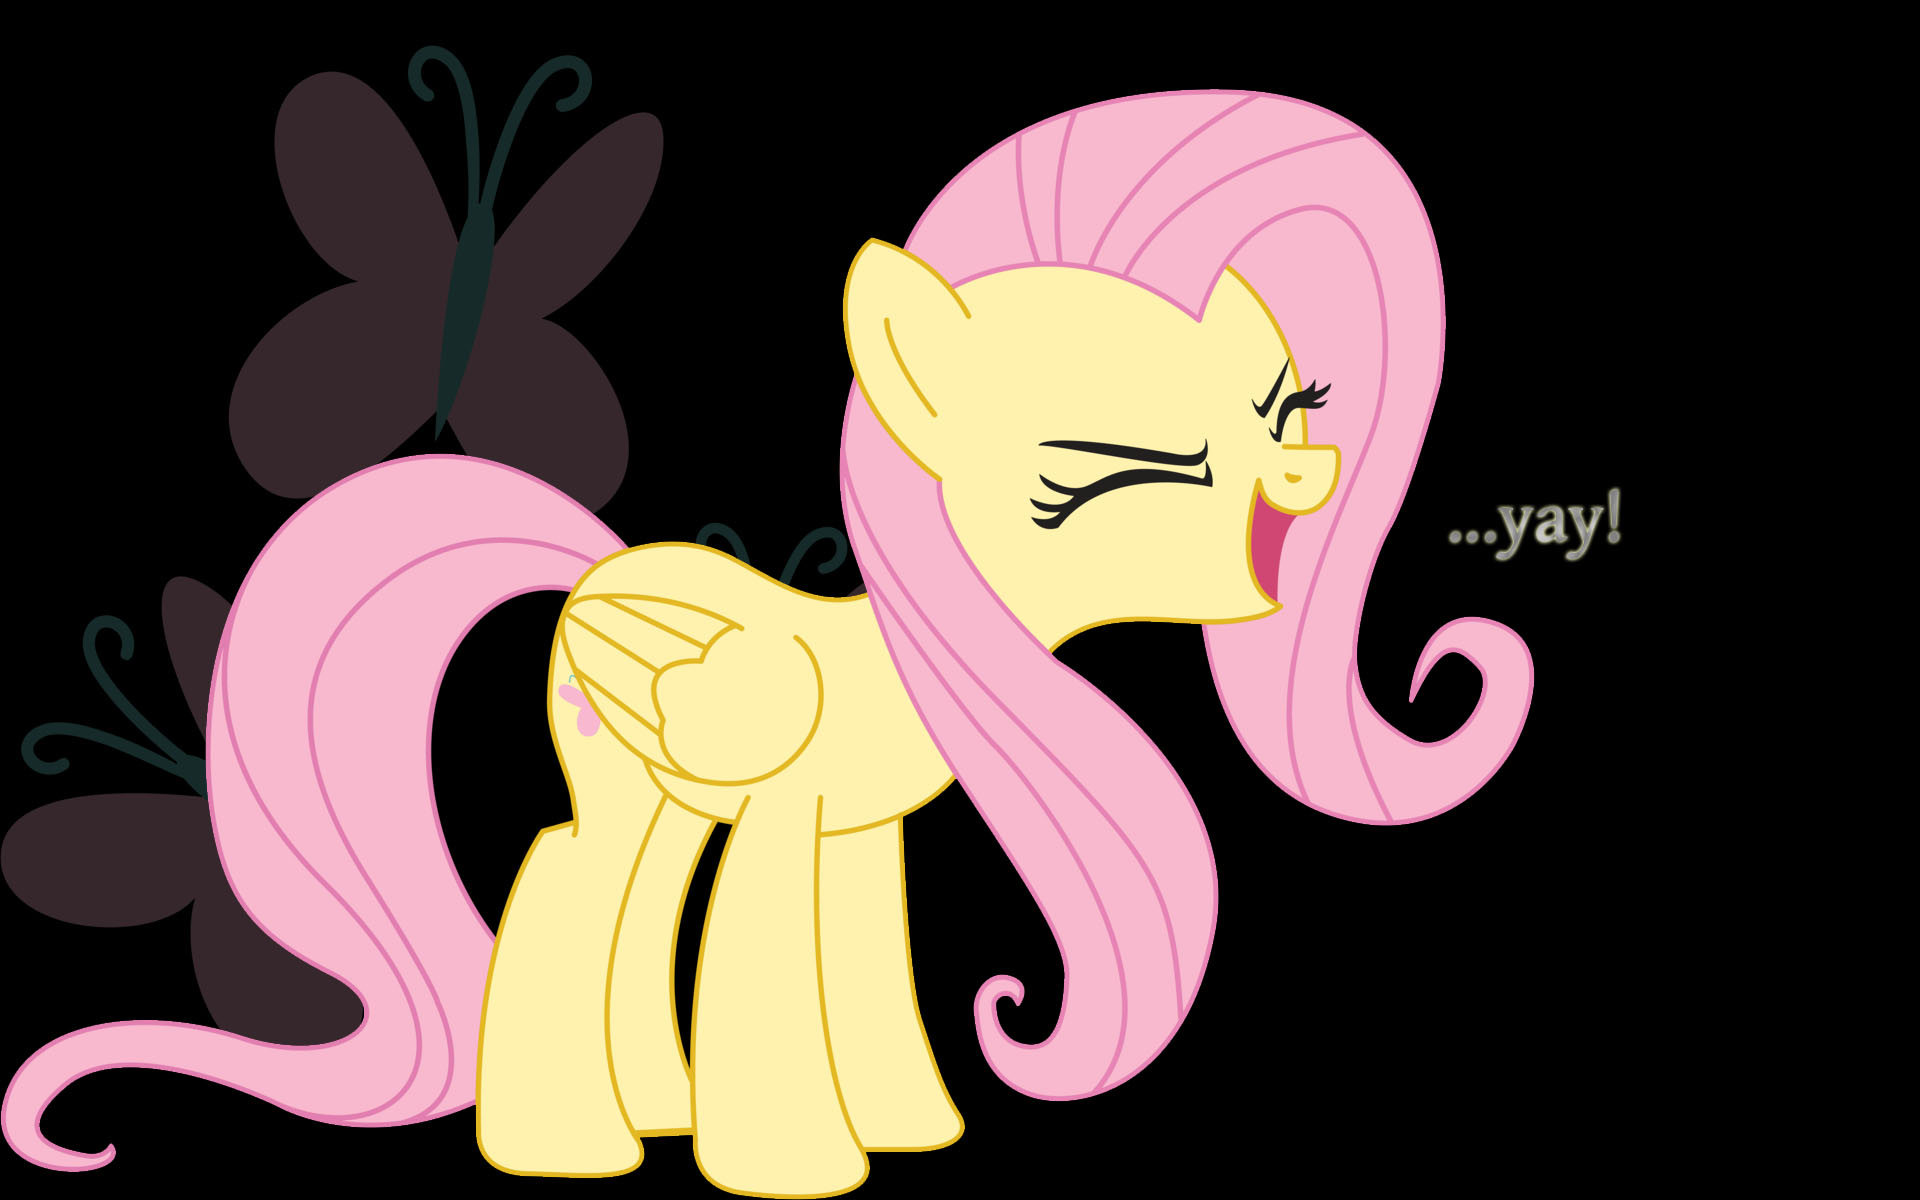 Yay! Fluttershy by P0nies